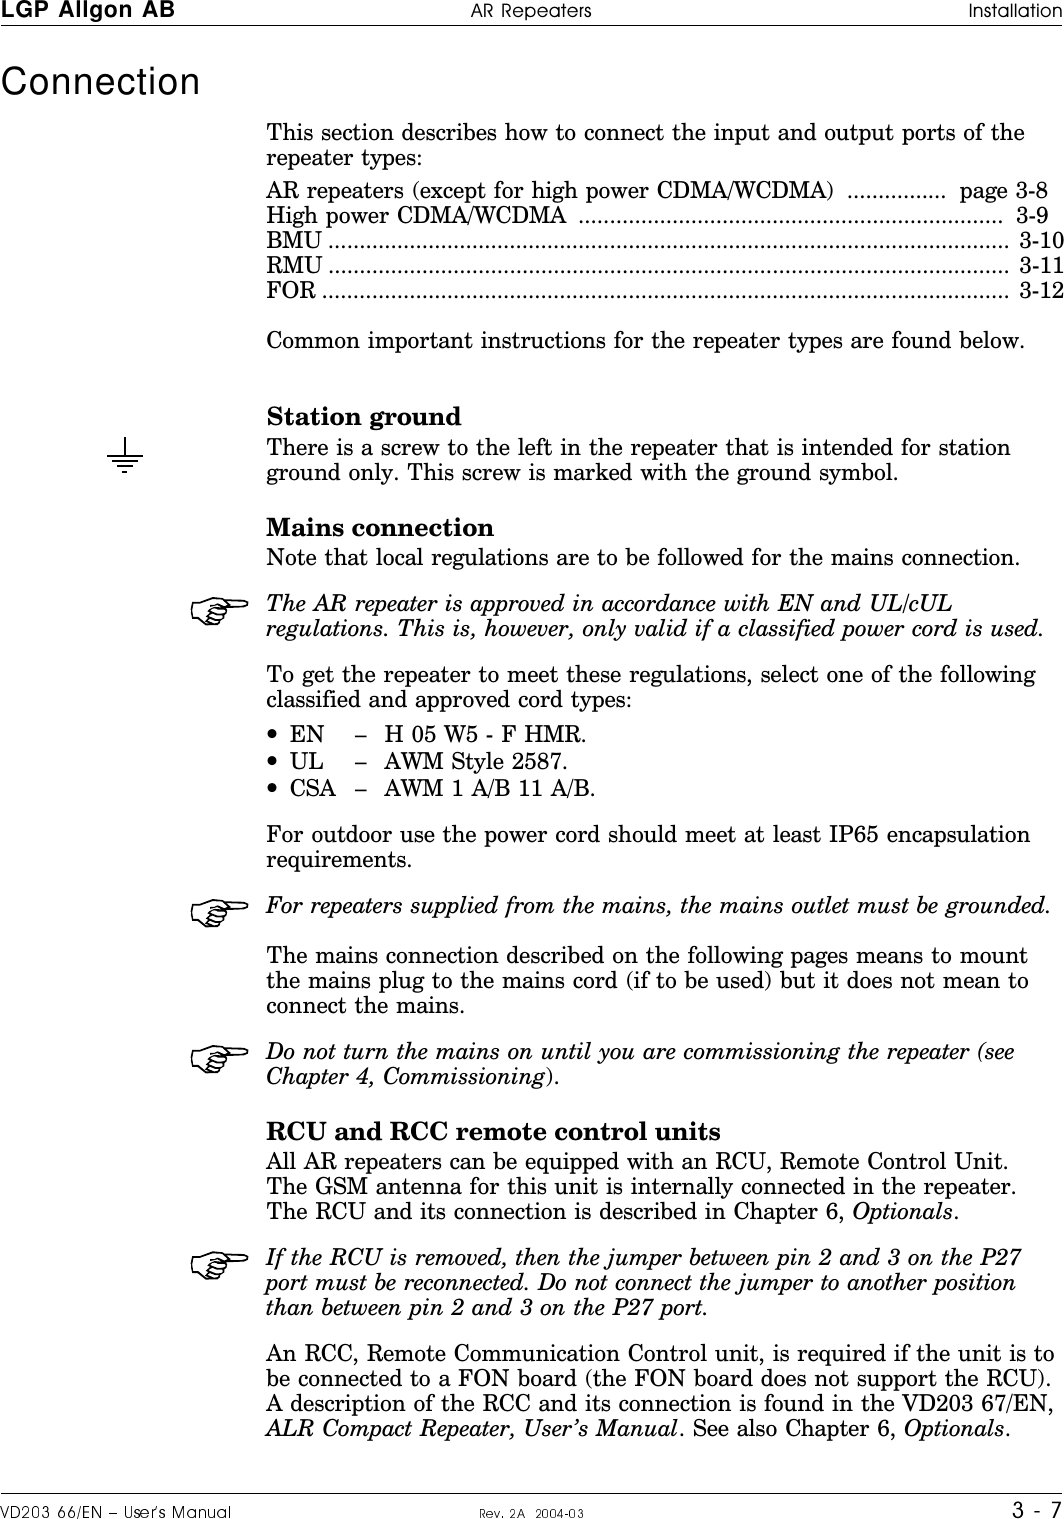 Connection This section describes how to connect the input and output ports of therepeater types:AR repeaters (except for high power CDMA/WCDMA)  ................  page 3-8  High power CDMA/WCDMA  ....................................................................  3-9  BMU ............................................................................................................. 3-10RMU ............................................................................................................. 3-11FOR .............................................................................................................. 3-12Common important instructions for the repeater types are found below.Station groundThere is a screw to the left in the repeater that is intended for stationground only. This screw is marked with the ground symbol.Mains connection Note that local regulations are to be followed for the mains connection.The AR repeater is approved in accordance with EN and UL/cULregulations. This is, however, only valid if a classified power cord is used.To get the repeater to meet these regulations, select one of the followingclassified and approved cord types:•EN – H 05 W5 - F HMR.•UL – AWM Style 2587.•CSA – AWM 1 A/B 11 A/B.For outdoor use the power cord should meet at least IP65 encapsulationrequirements.For repeaters supplied from the mains, the mains outlet must be grounded.The mains connection described on the following pages means to mountthe mains plug to the mains cord (if to be used) but it does not mean toconnect the mains.Do not turn the mains on until you are commissioning the repeater (seeChapter 4, Commissioning).RCU and RCC remote control unitsAll AR repeaters can be equipped with an RCU, Remote Control Unit.The GSM antenna for this unit is internally connected in the repeater.The RCU and its connection is described in Chapter 6, Optionals.If the RCU is removed, then the jumper between pin 2 and 3 on the P27port must be reconnected. Do not connect the jumper to another positionthan between pin 2 and 3 on the P27 port.An RCC, Remote Communication Control unit, is required if the unit is tobe connected to a FON board (the FON board does not support the RCU).A description of the RCC and its connection is found in the VD203 67/EN,ALR Compact Repeater, User’s Manual. See also Chapter 6, Optionals.LGP Allgon AB H|H#H o#ff#croa